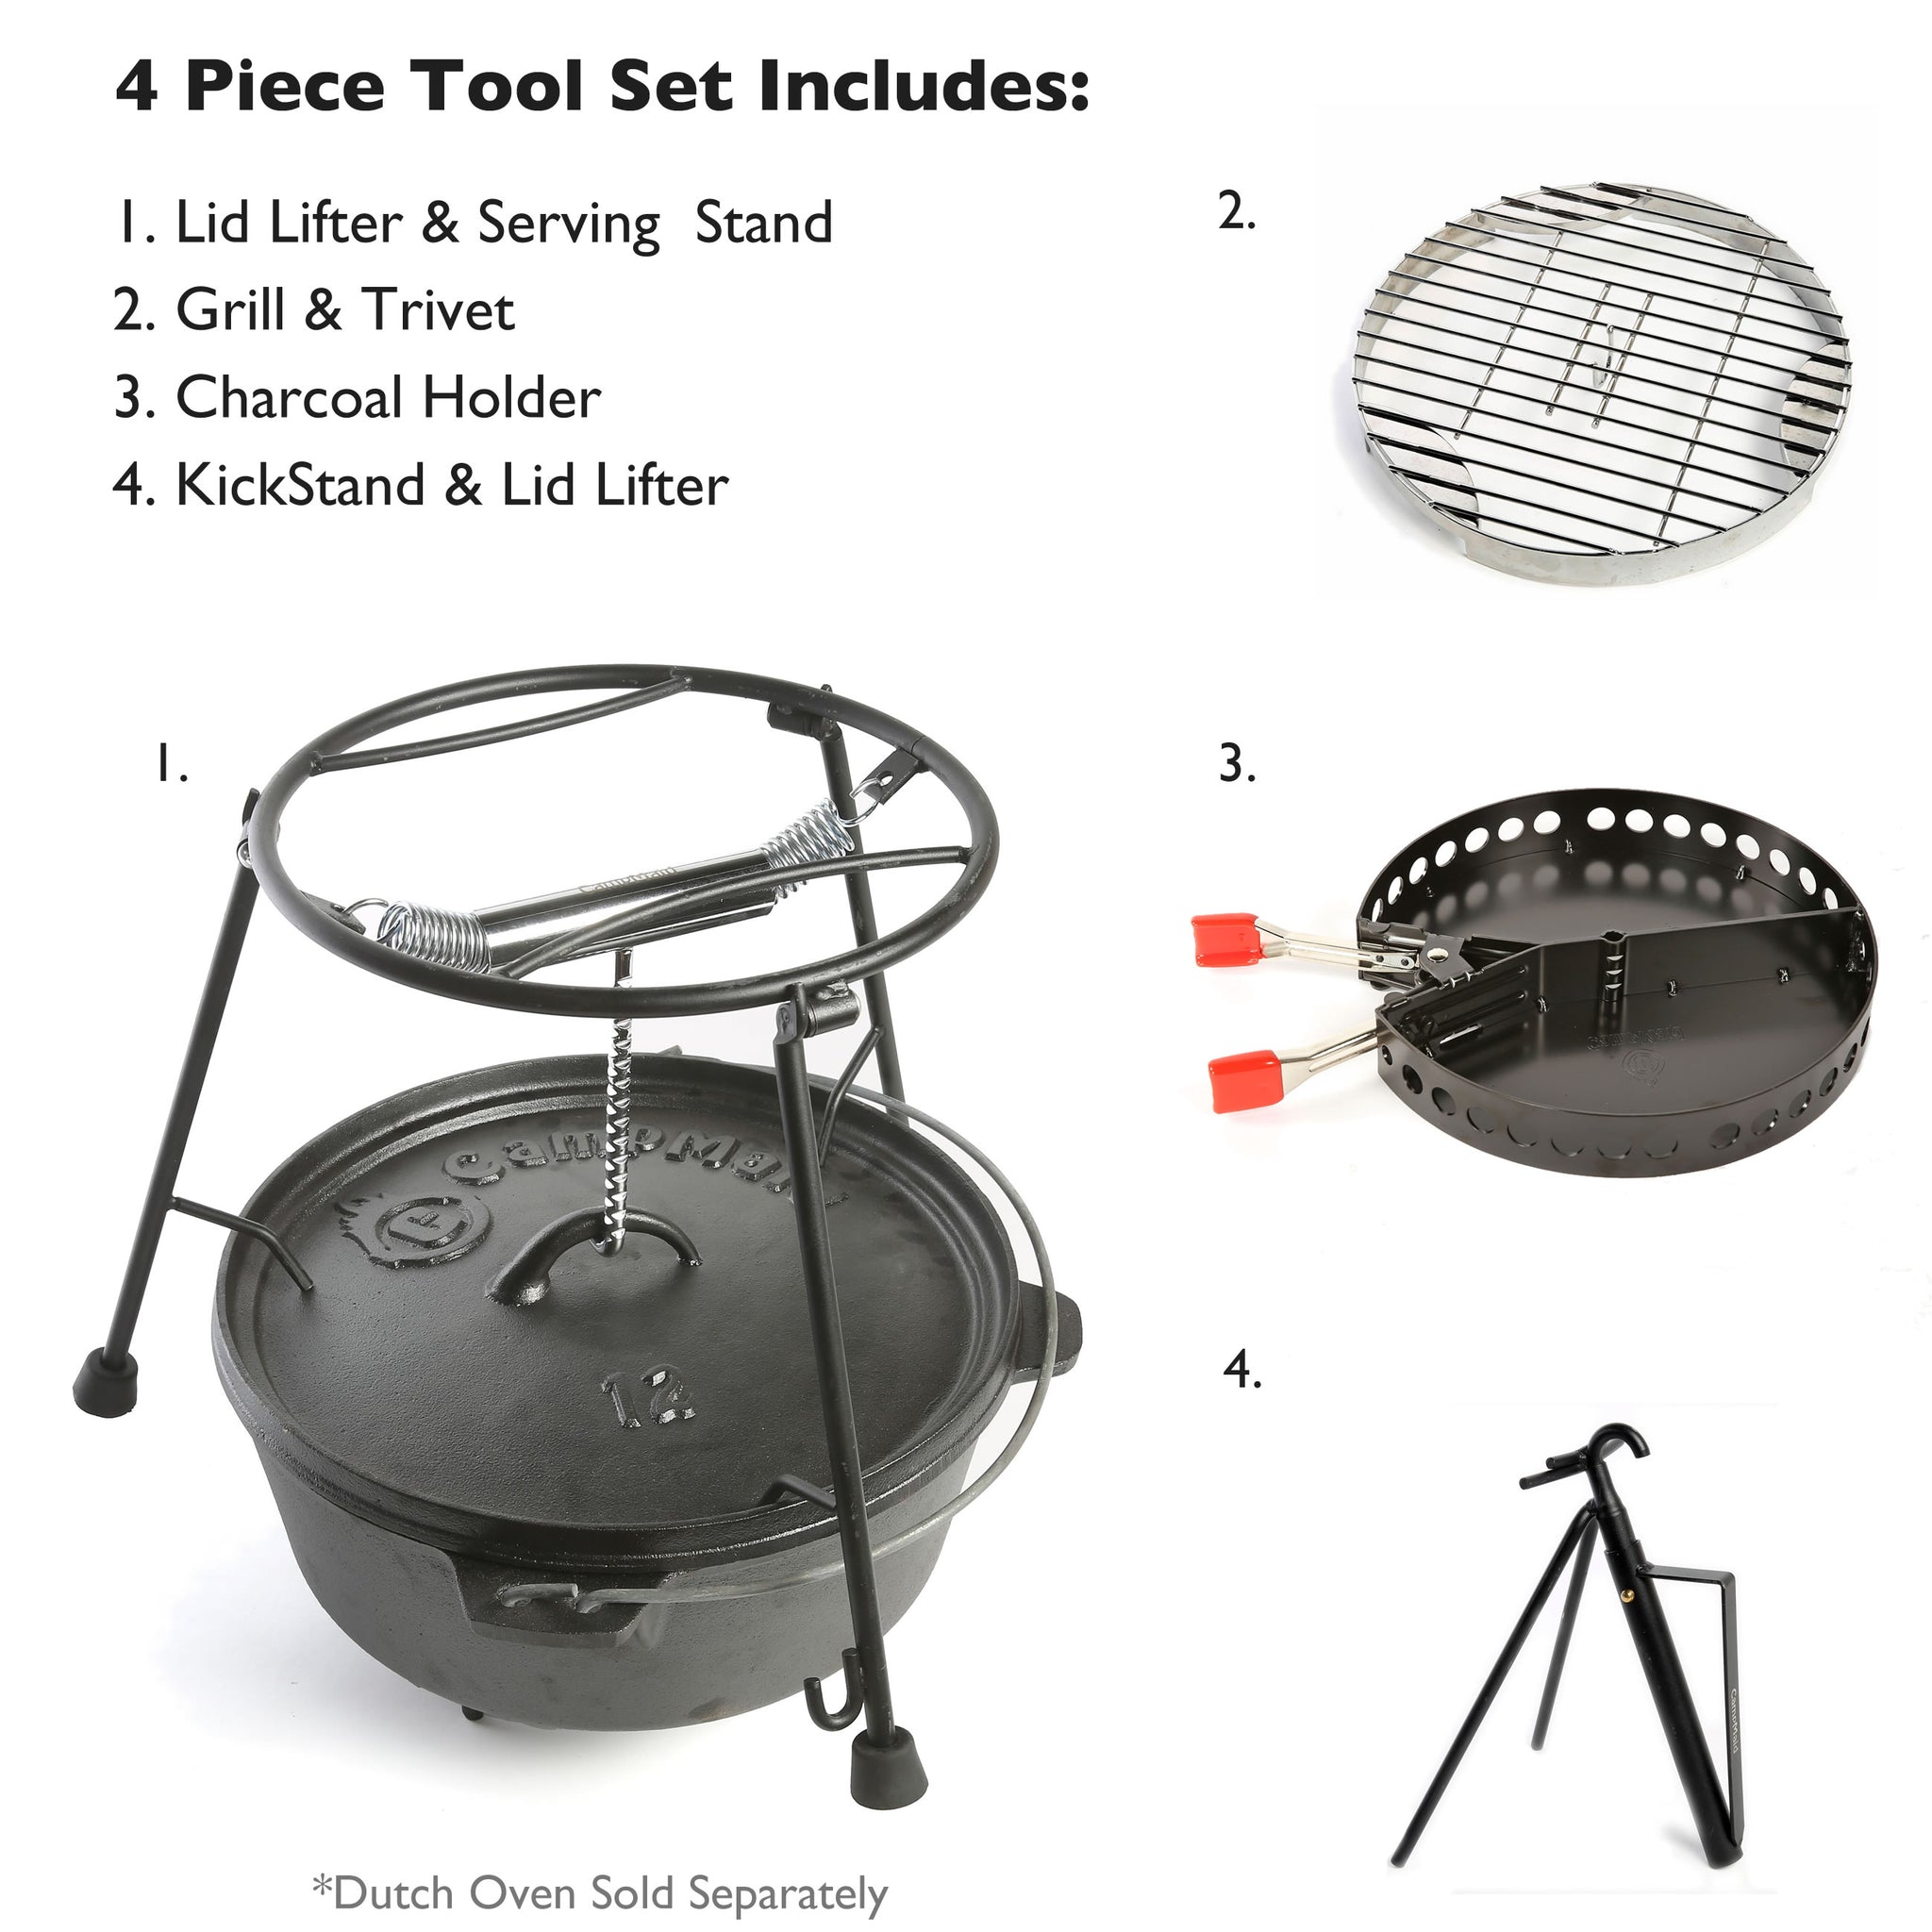 CampMaid Charcoal Holder & Lid Lifter - Dutch Oven Tools Set - Charcoal  Holder & Cast Iron Grill Accessories - Camping Grill Set - Outdoor Cooking